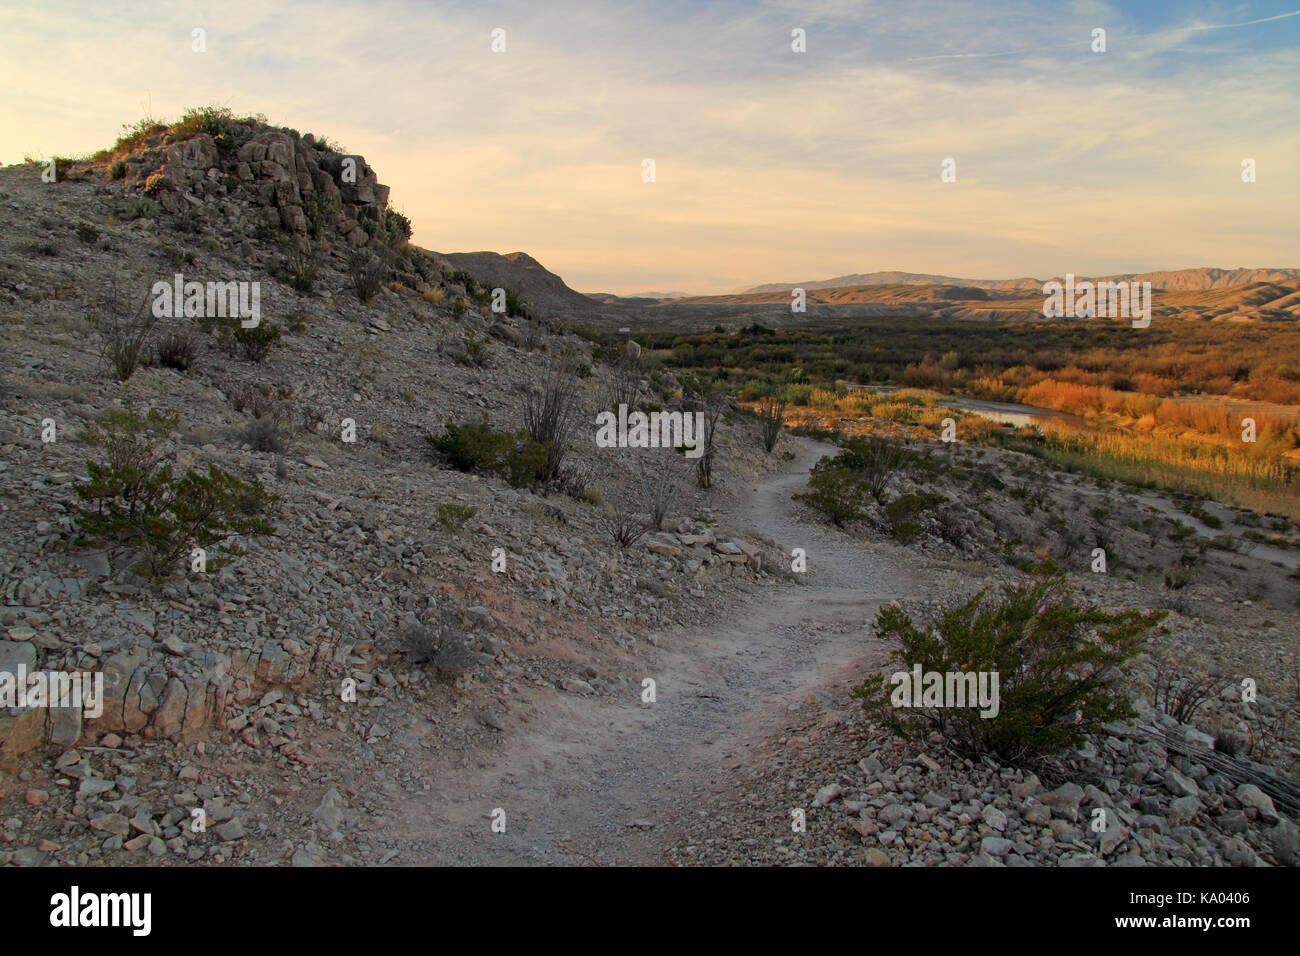 The Rio Grande Village Nature Trail provides visitors with easy access to spectacular vistas of the Rio Grande Valley, Big Bend National Park, Texas Stock Photo